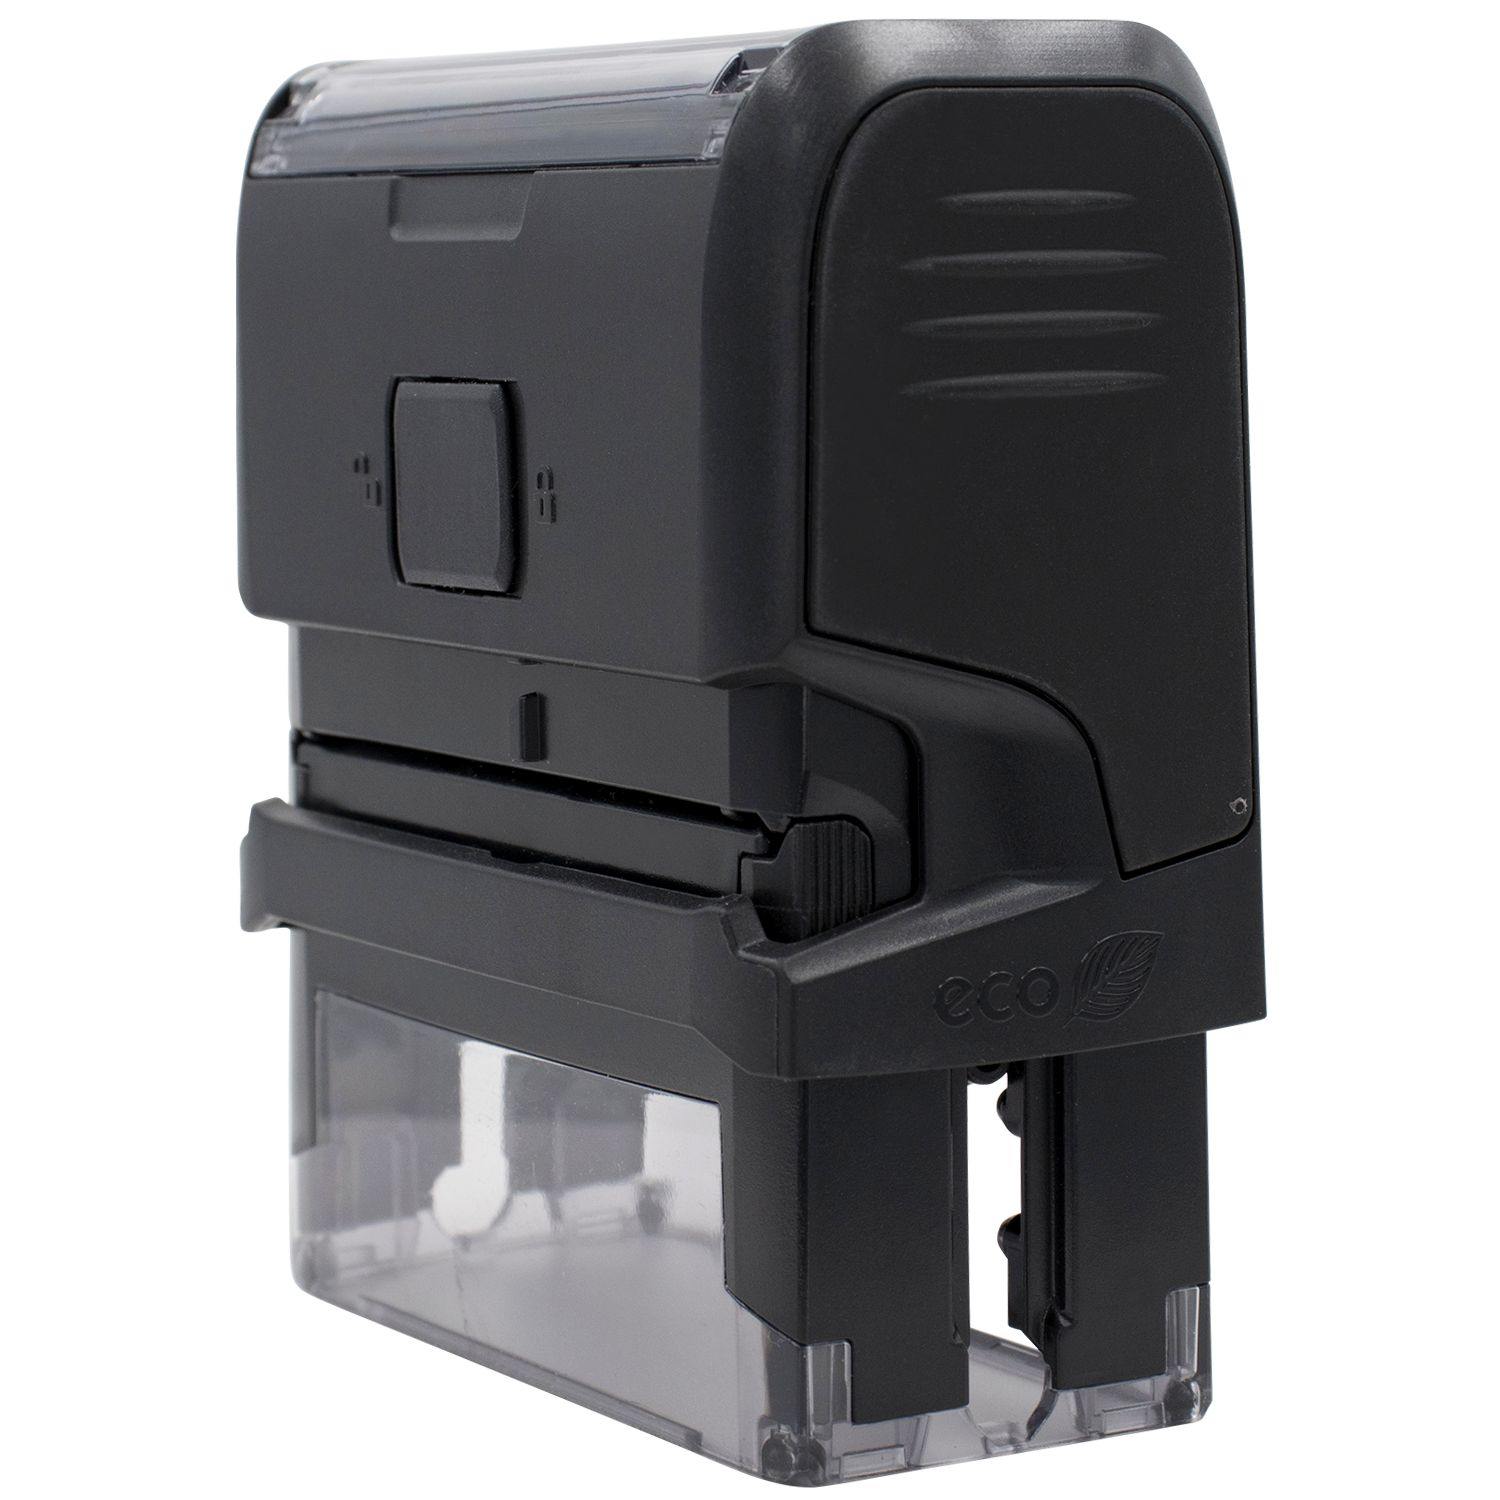 Side View of Large Self-Inking Bold Allergies Stamp at an Angle